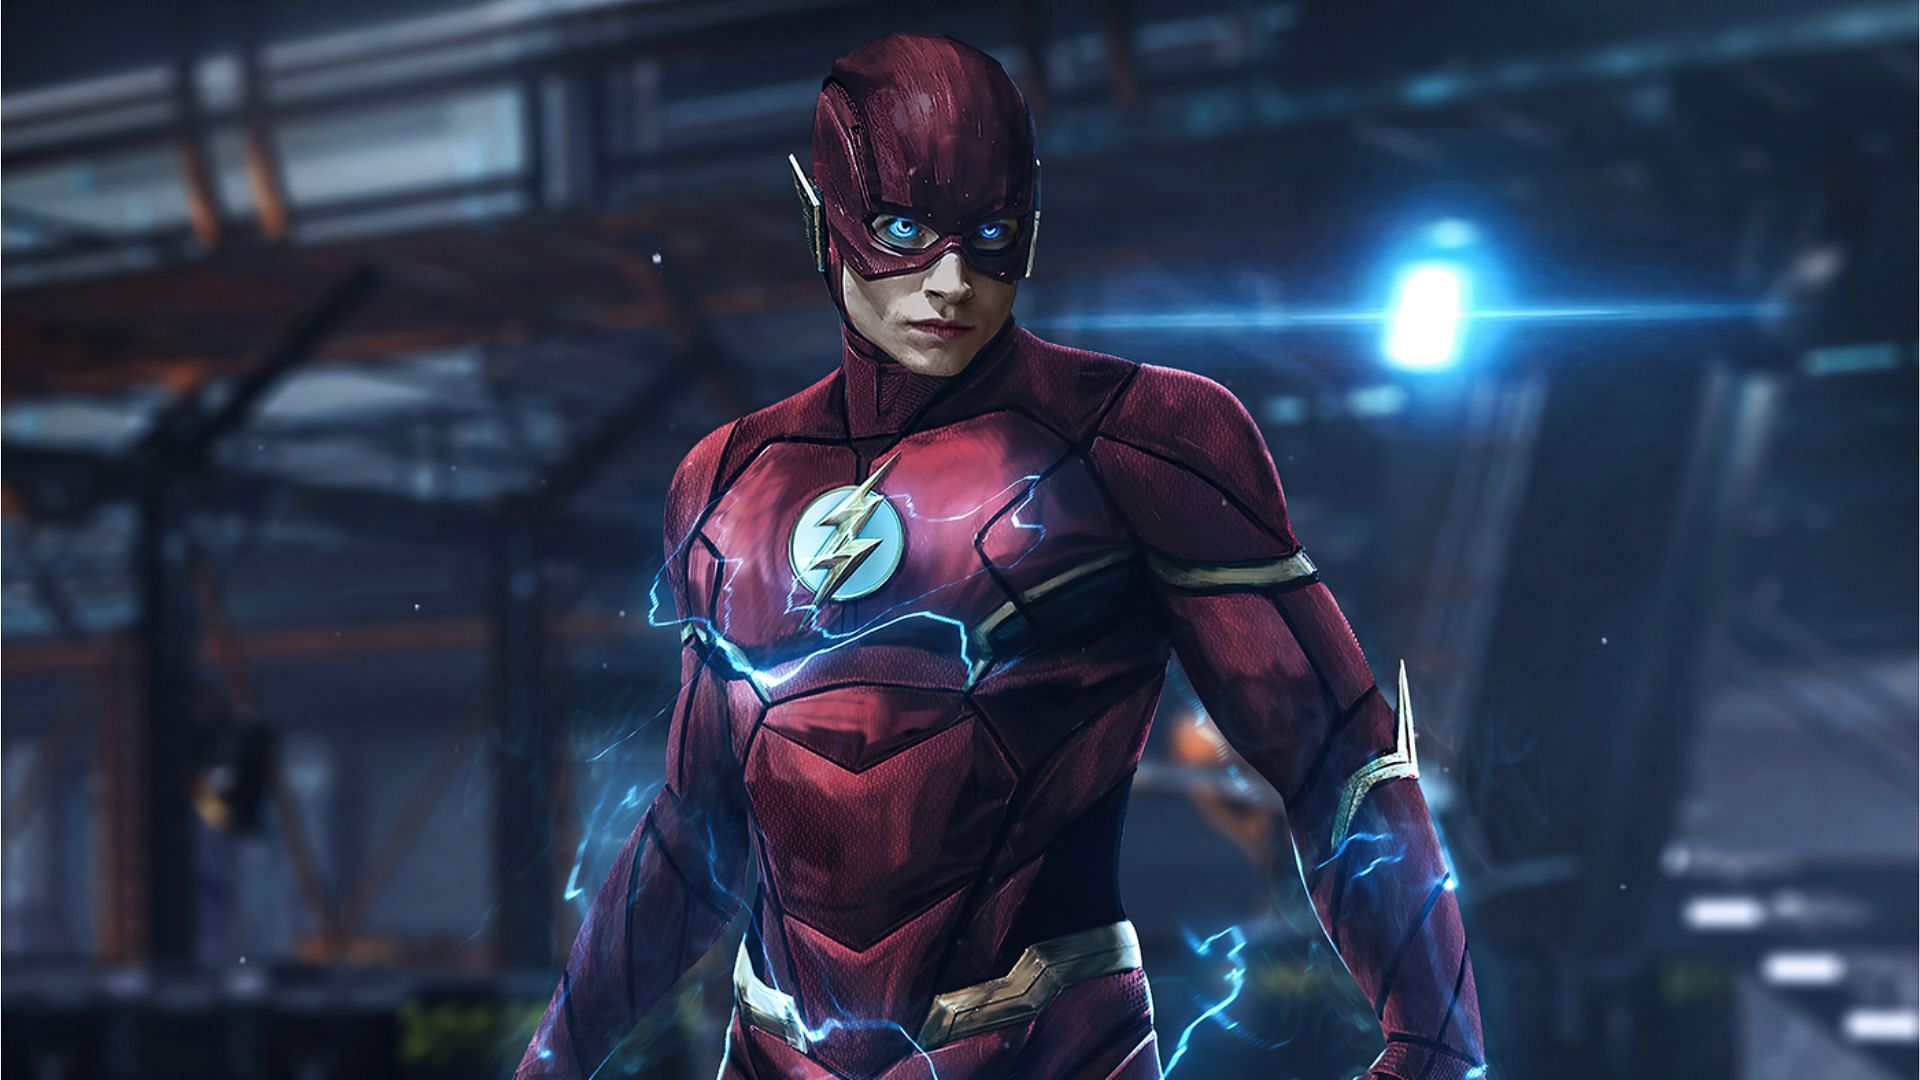 The Flash movie has a surprise pic of Lord Hanuman in the background (Image via DC)